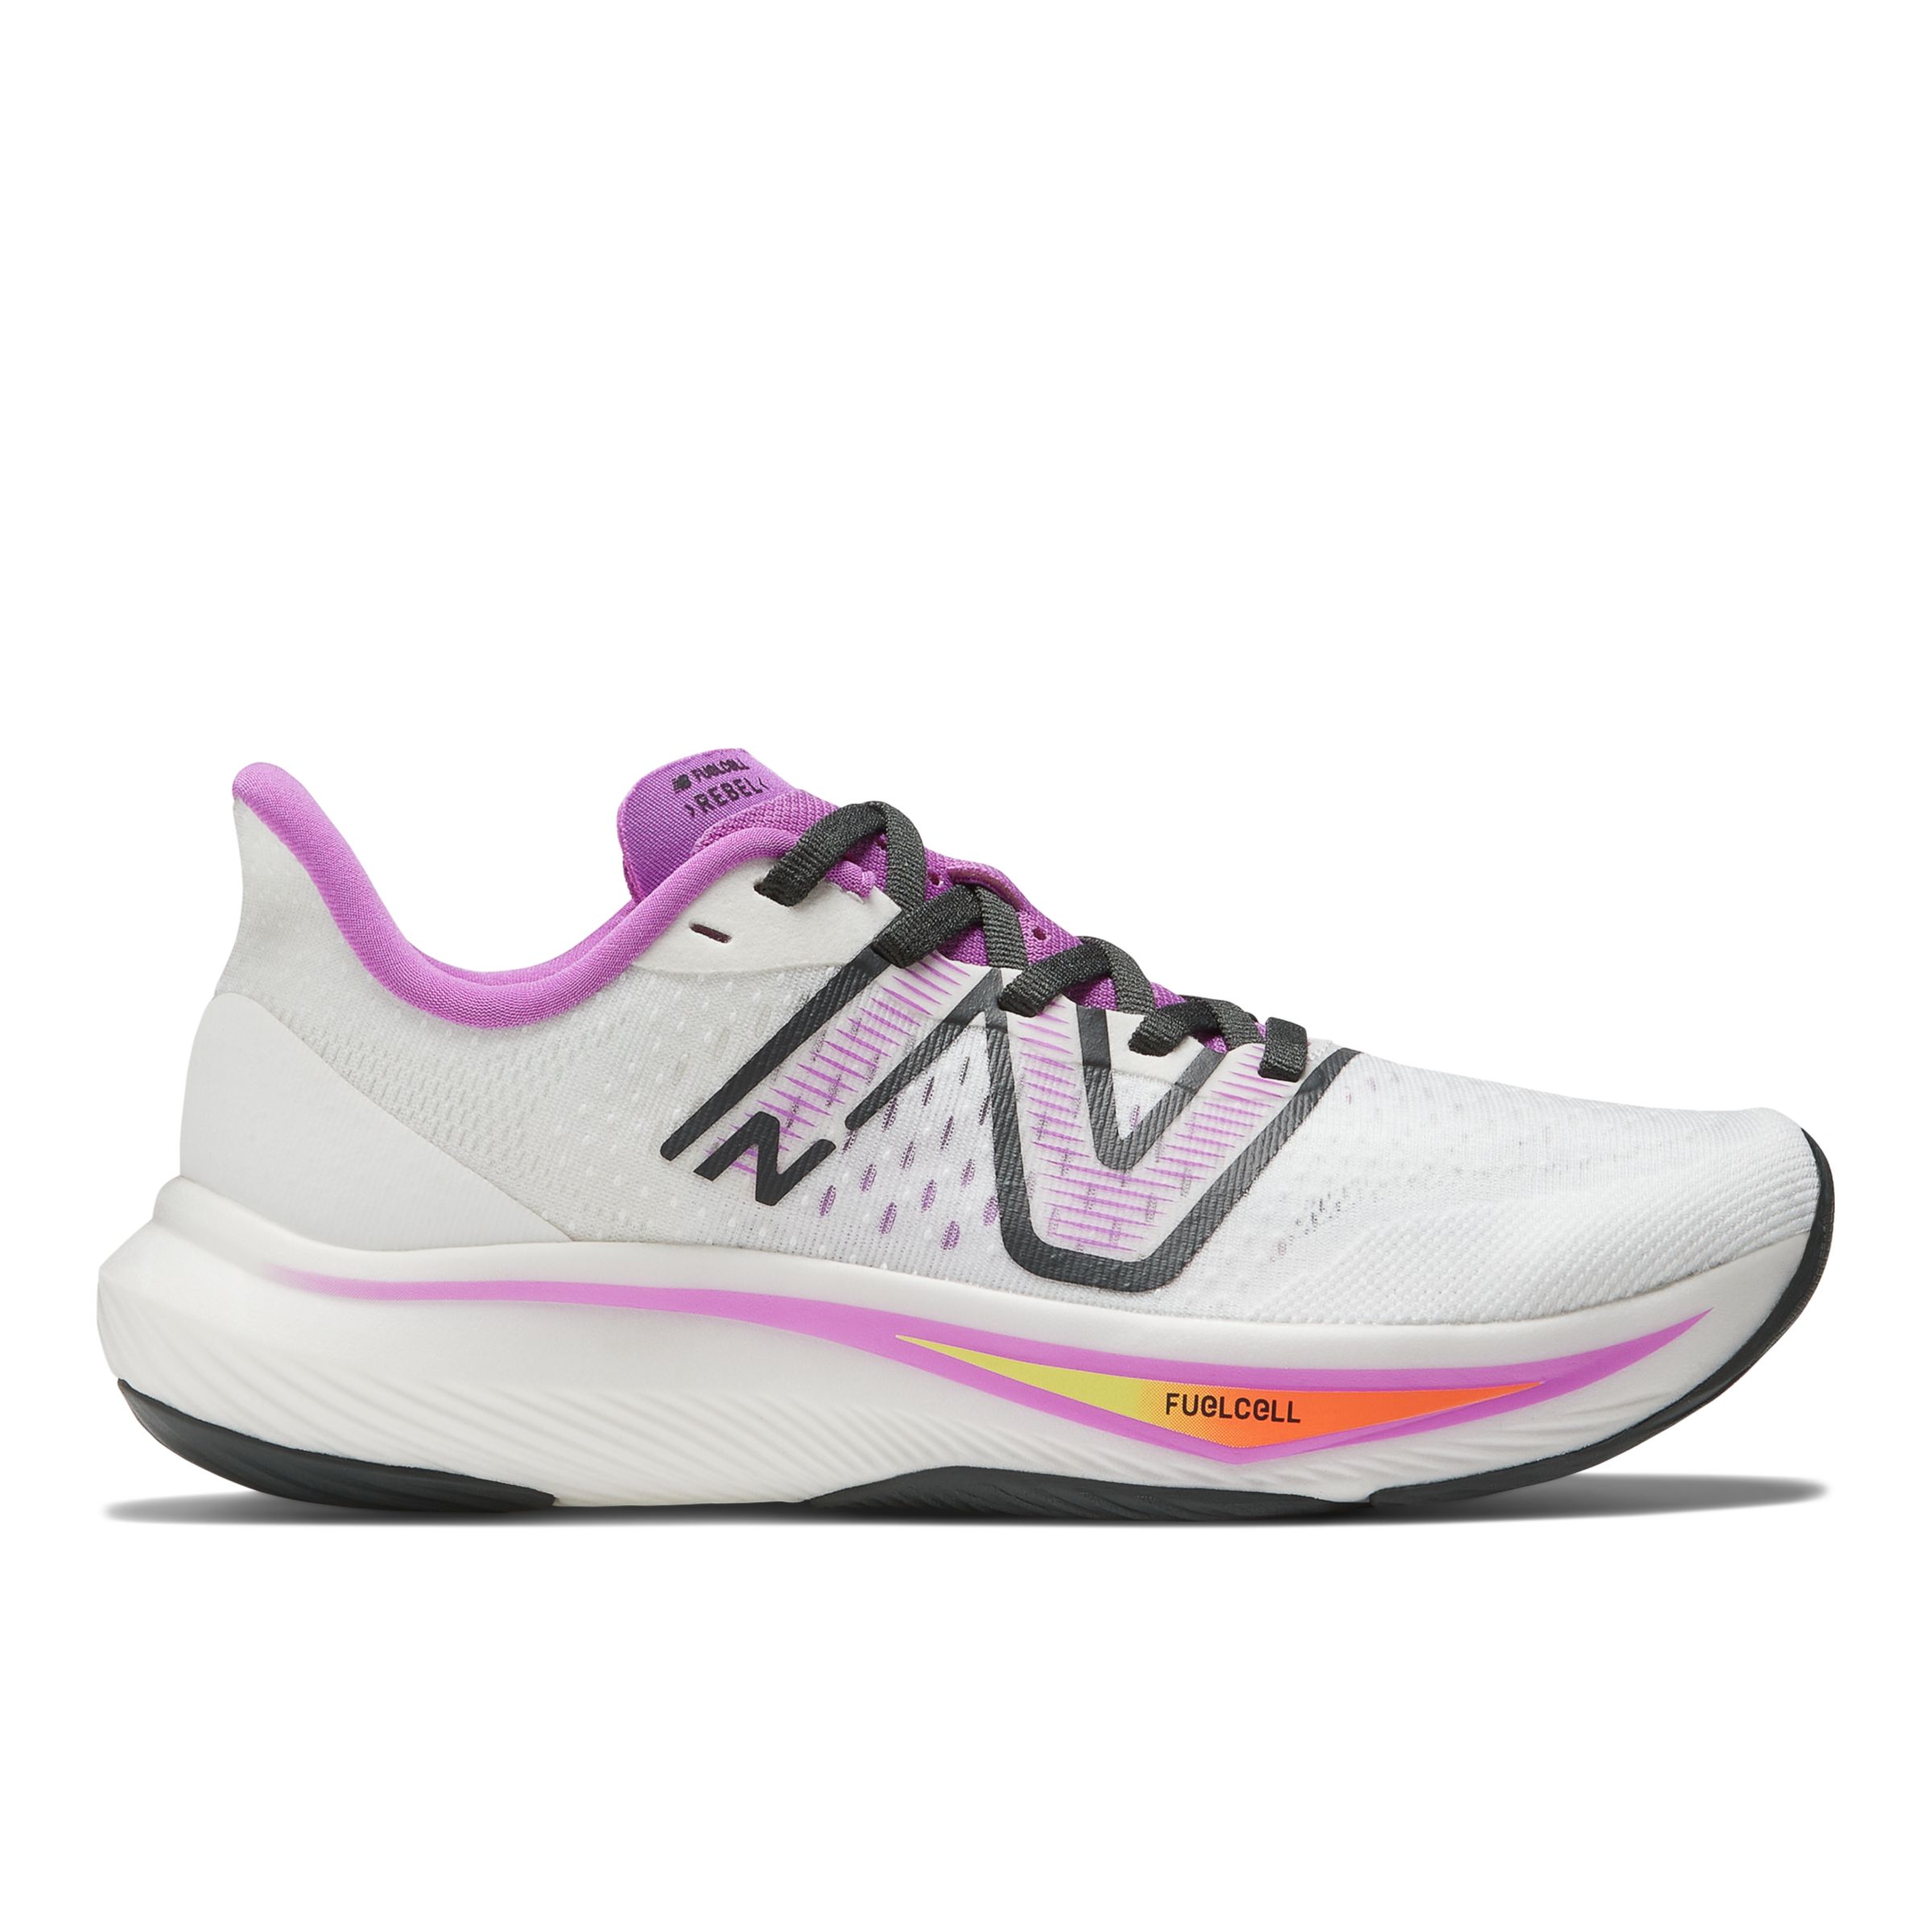 New Balance Femme FuelCell Rebel v3 en Blanc/Rose/Gris, Synthetic, Taille 40.5